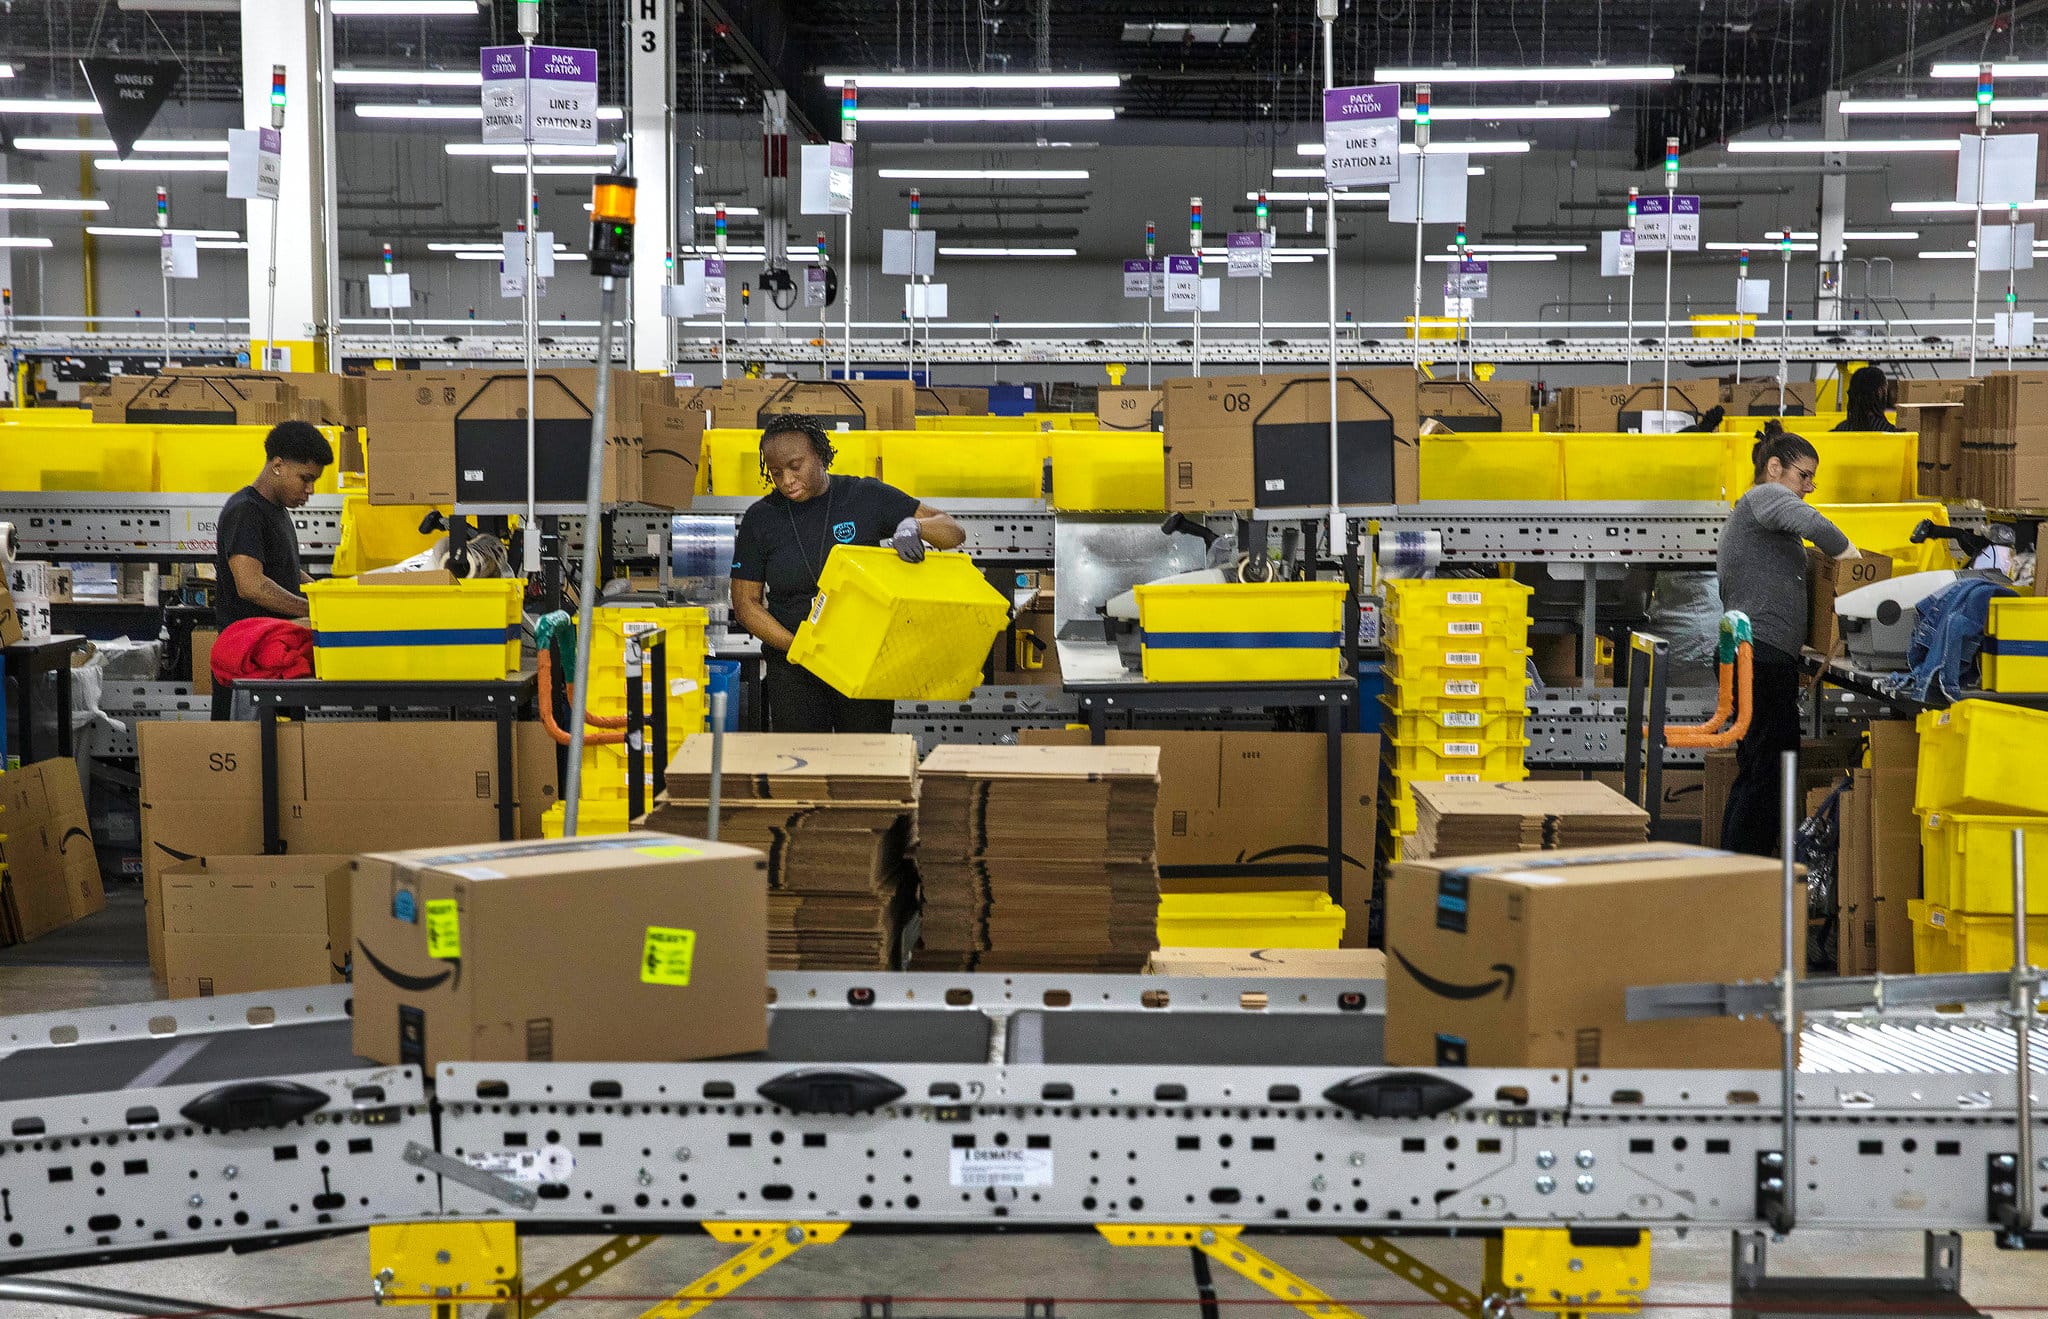 Warehouses focused on efficient eCommerce operations often include automation like conveyor belts to reduce the need for manual labor.